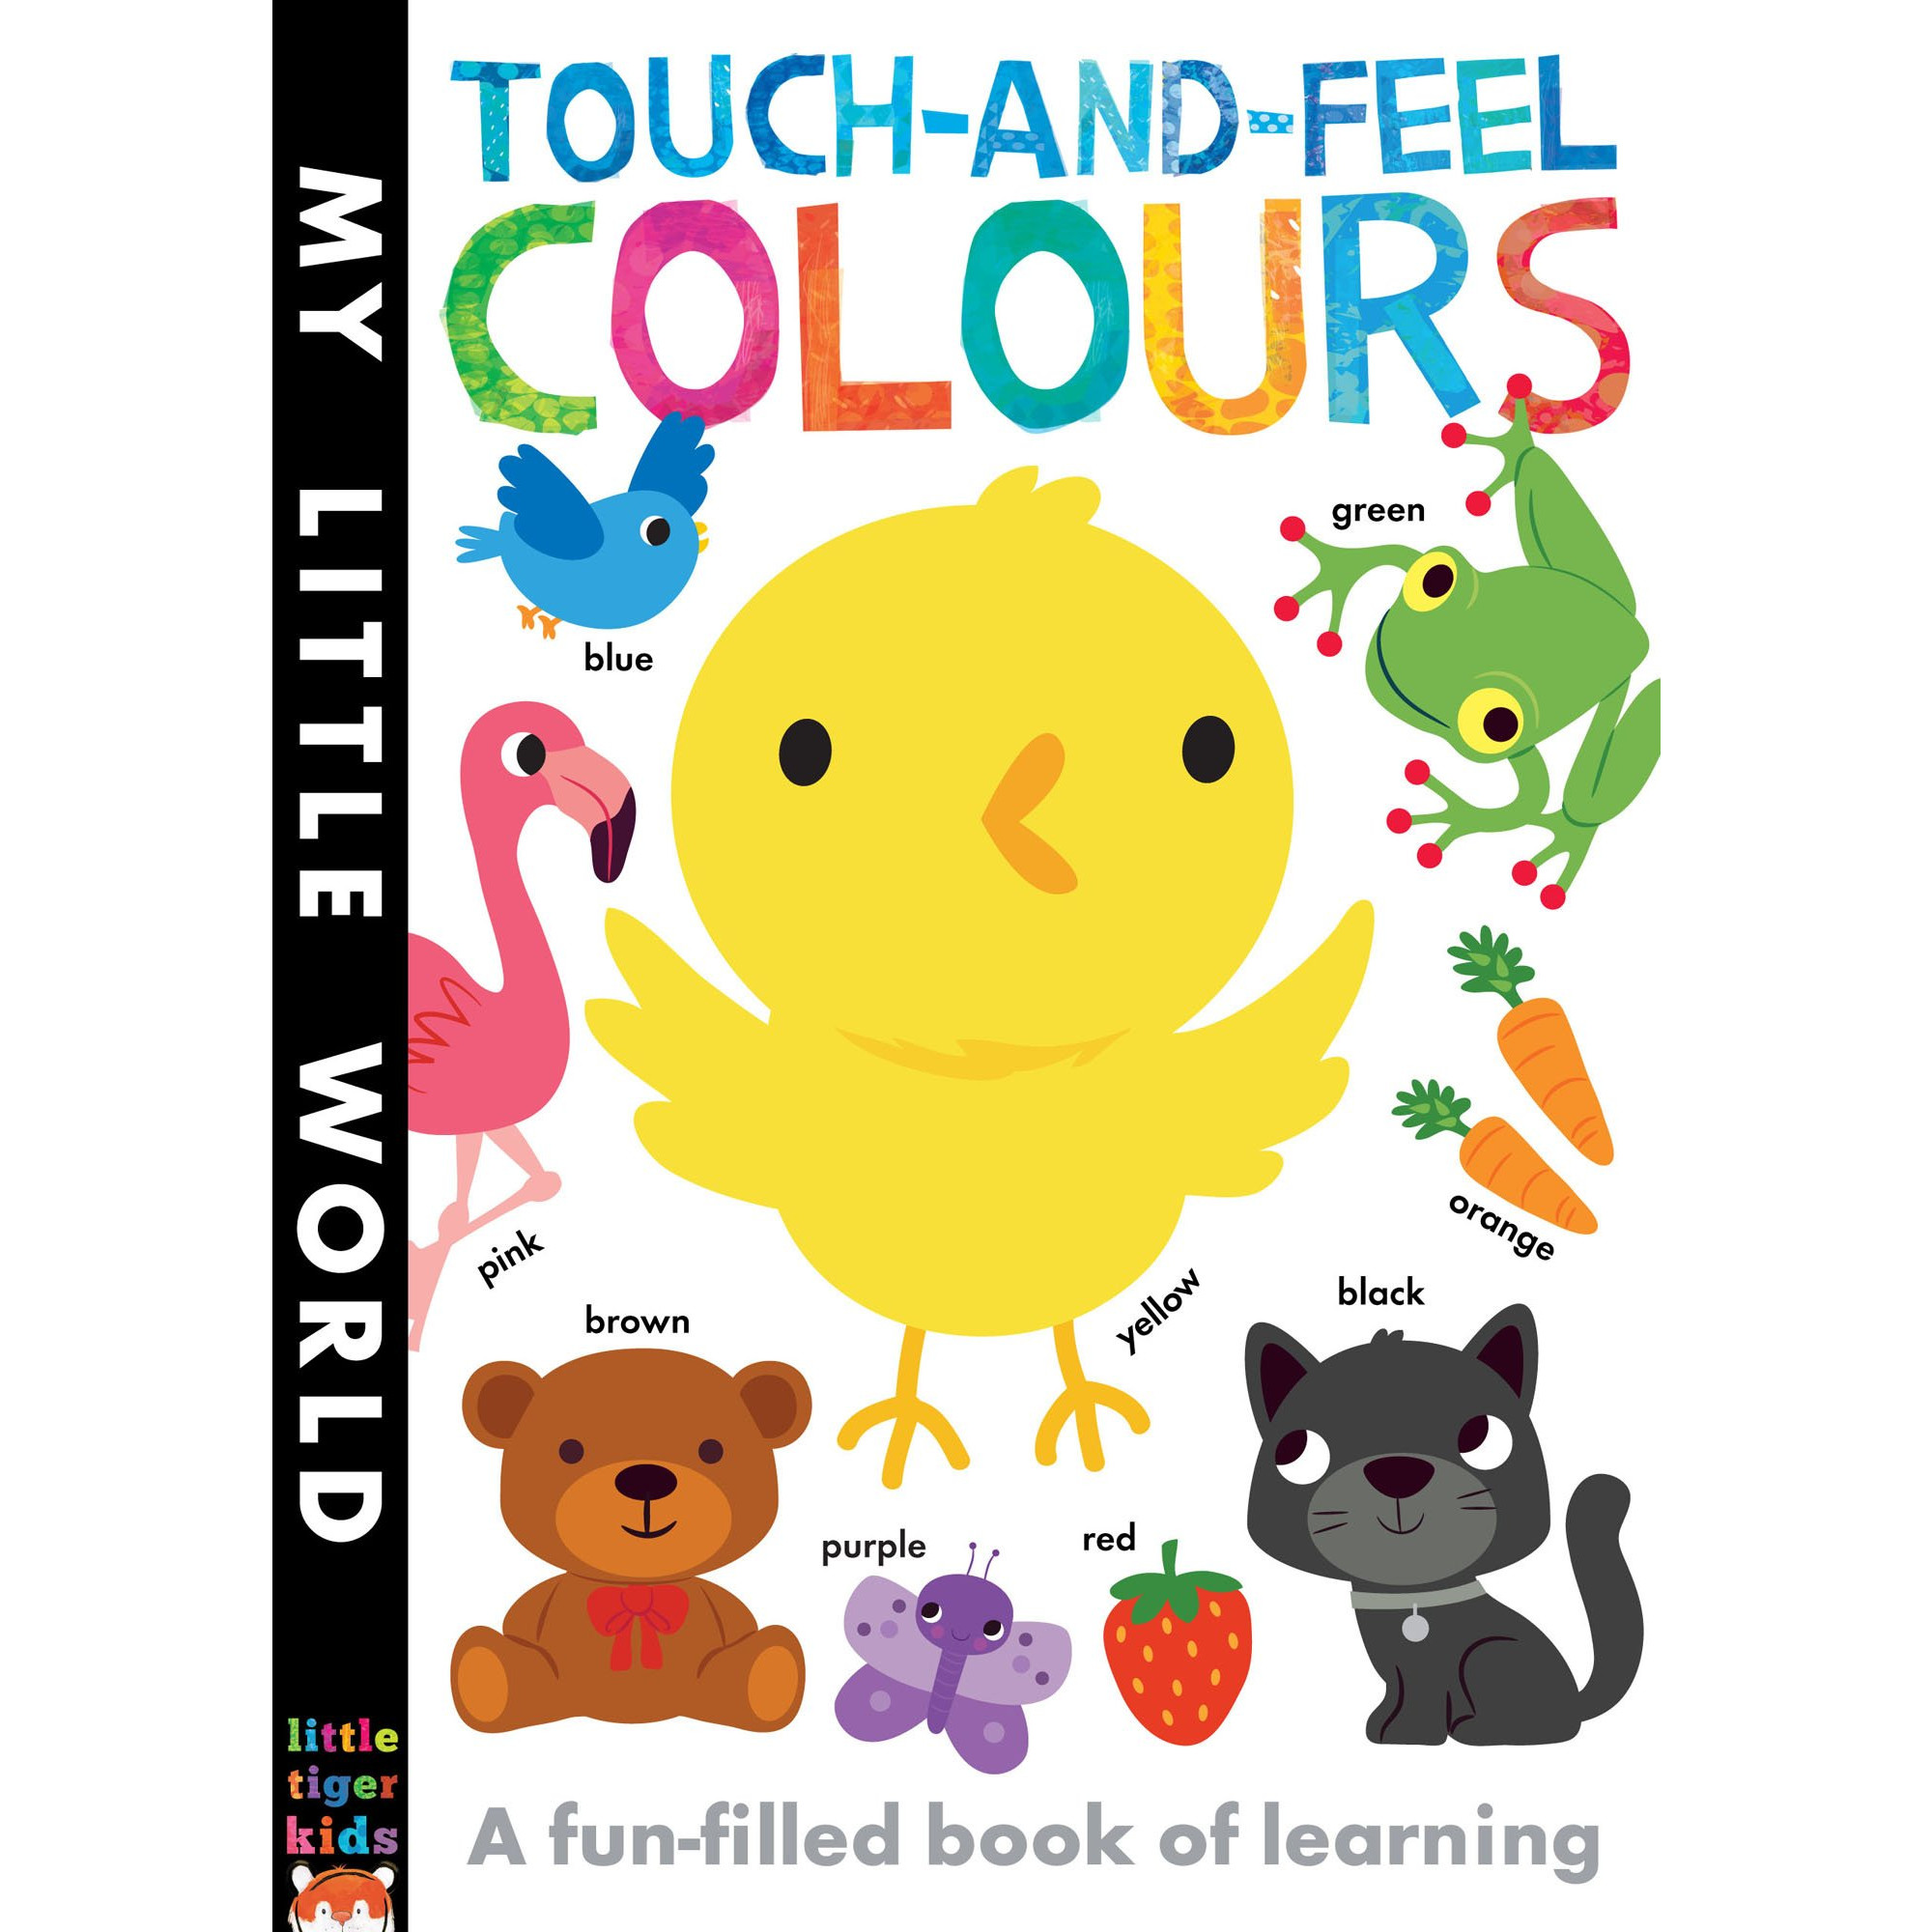 Touch-and-feel Colours